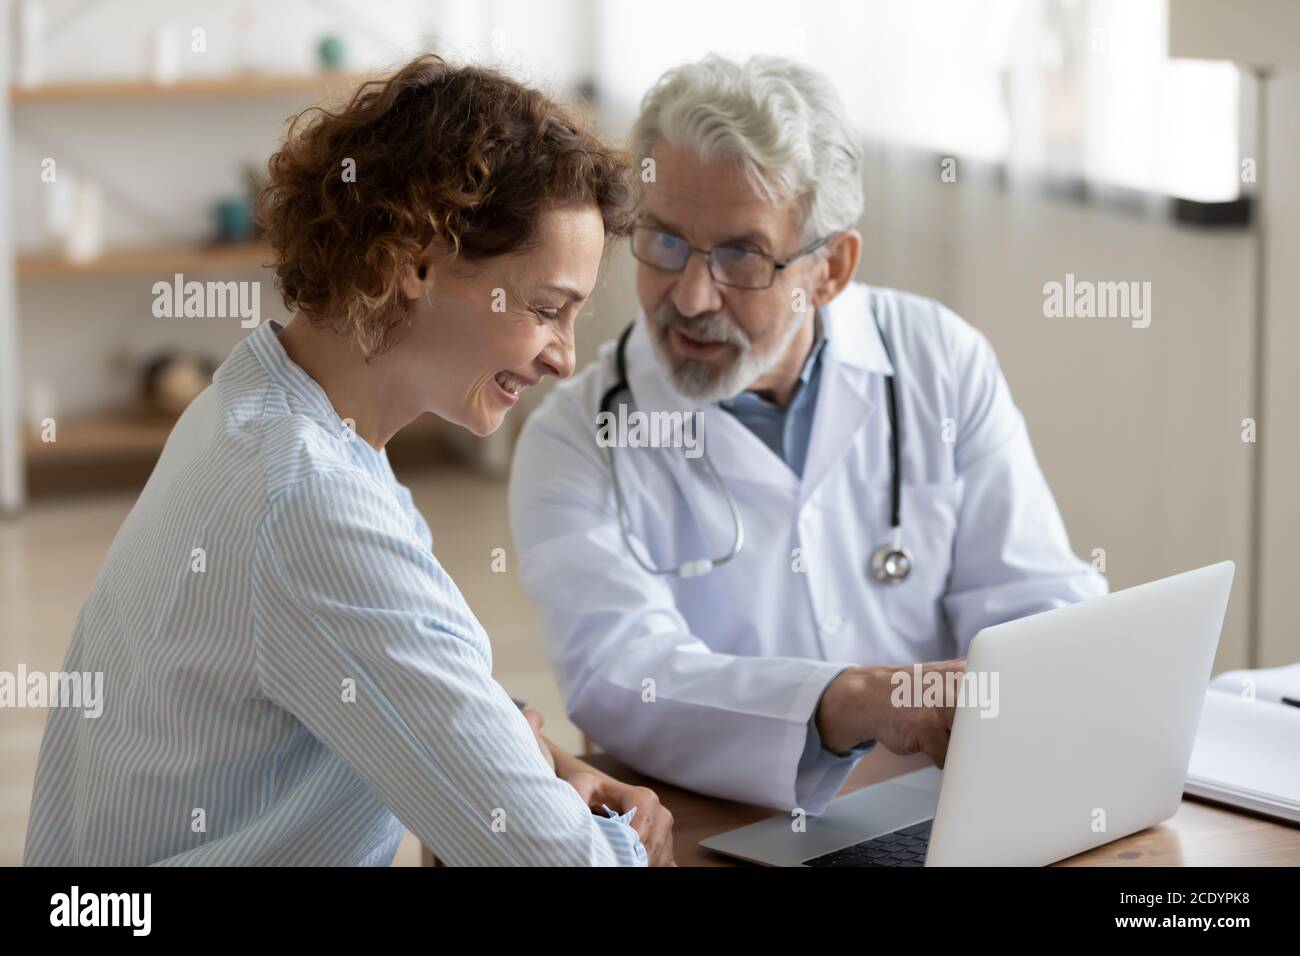 Friendly mature doctor talking to laughing patient at meeting Stock Photo